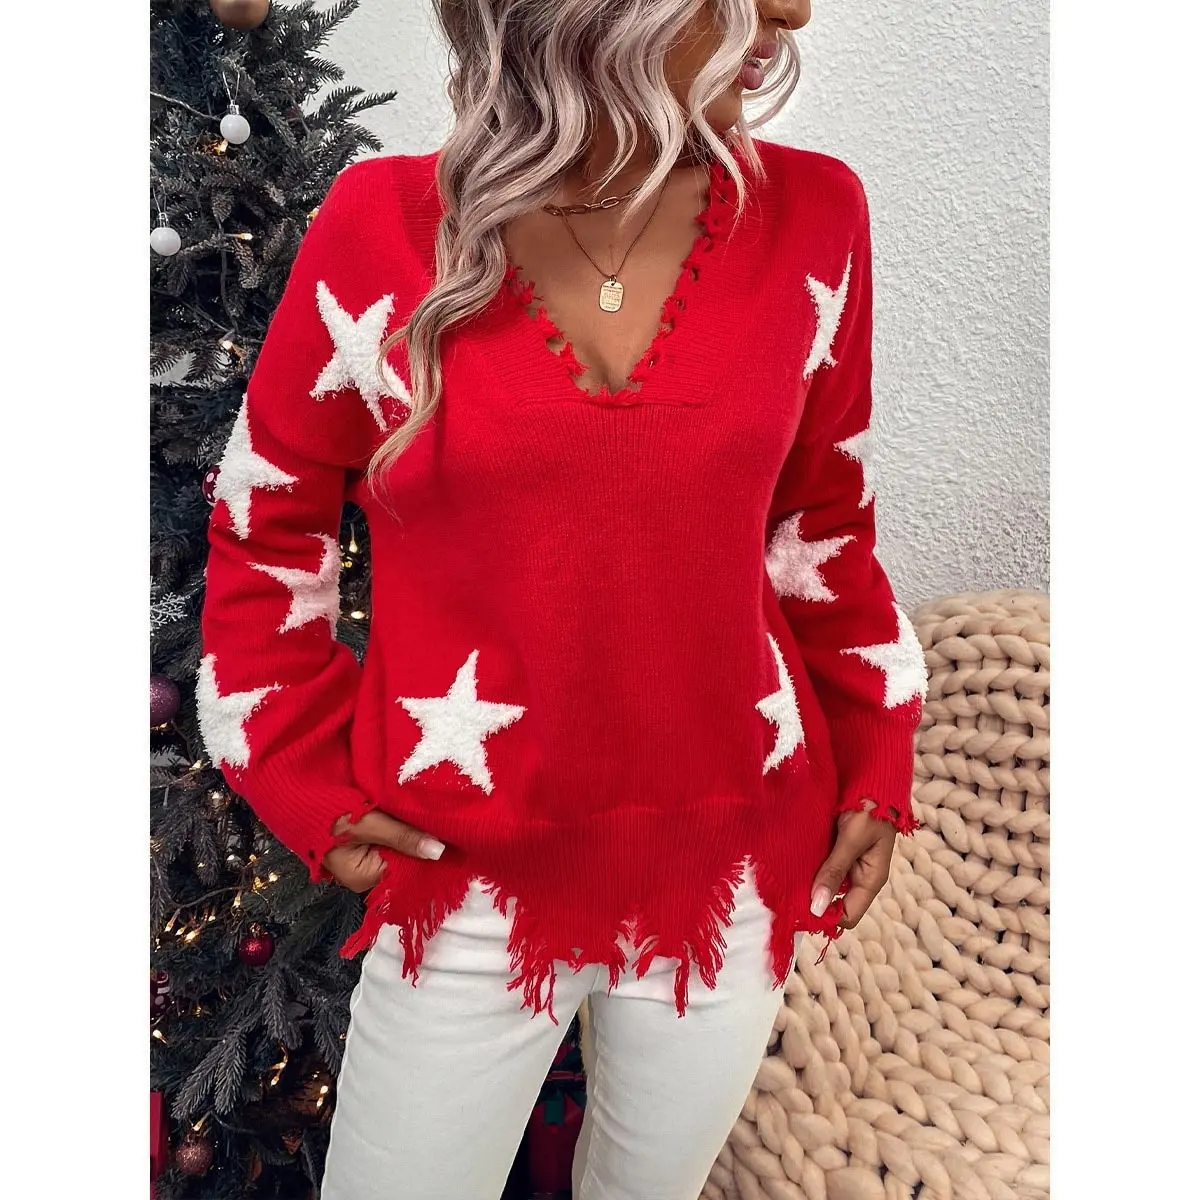 Knitted Pullover Christmas Jumper V Neck Star Red New Year Xmas Sweaters Custom Wholesale Ugly Christmas Sweater Women